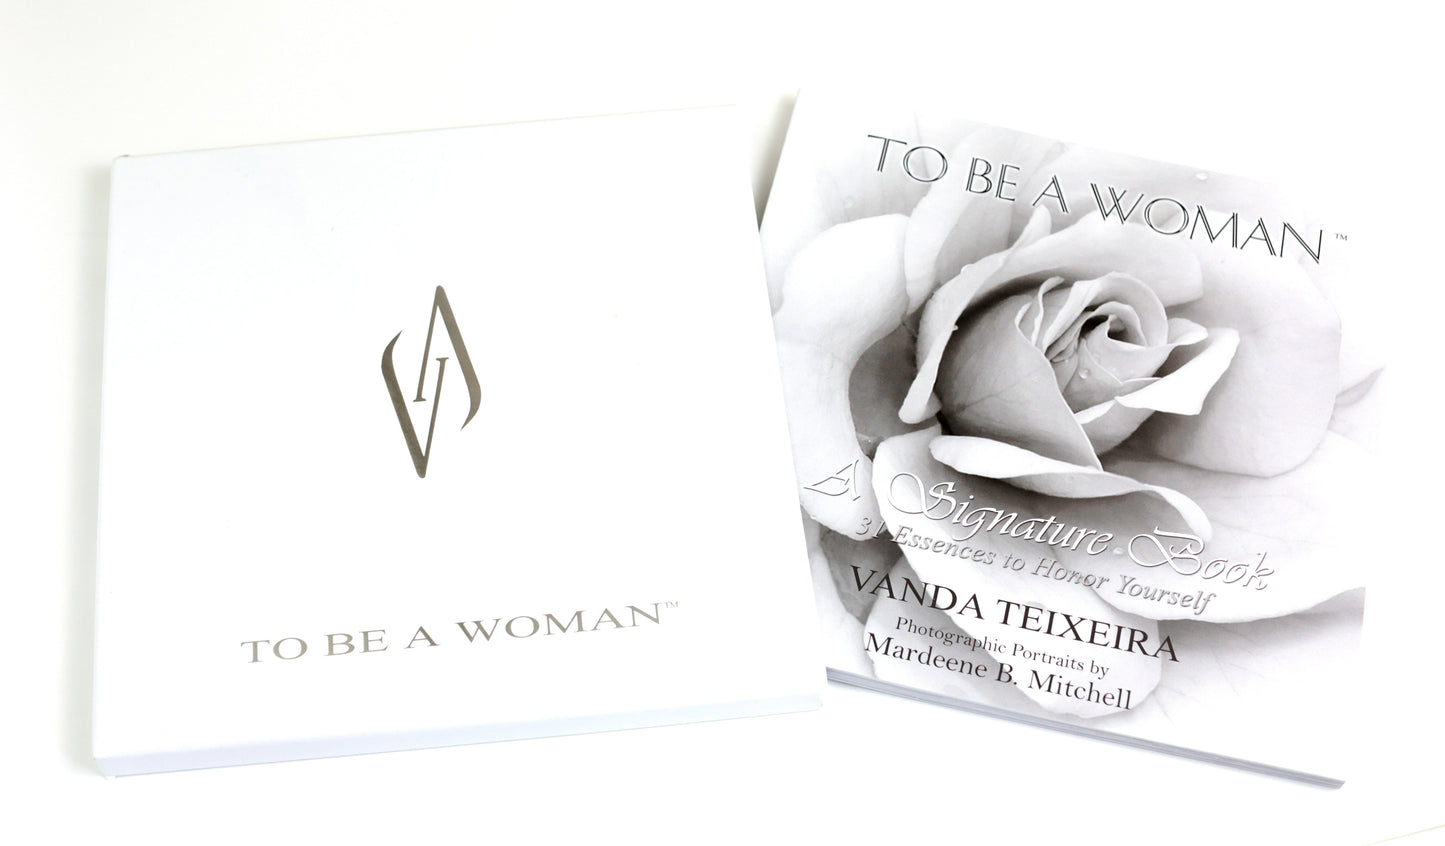 To Be a Woman™ - 31 Powerful Essences Signature Book (Hardcover)